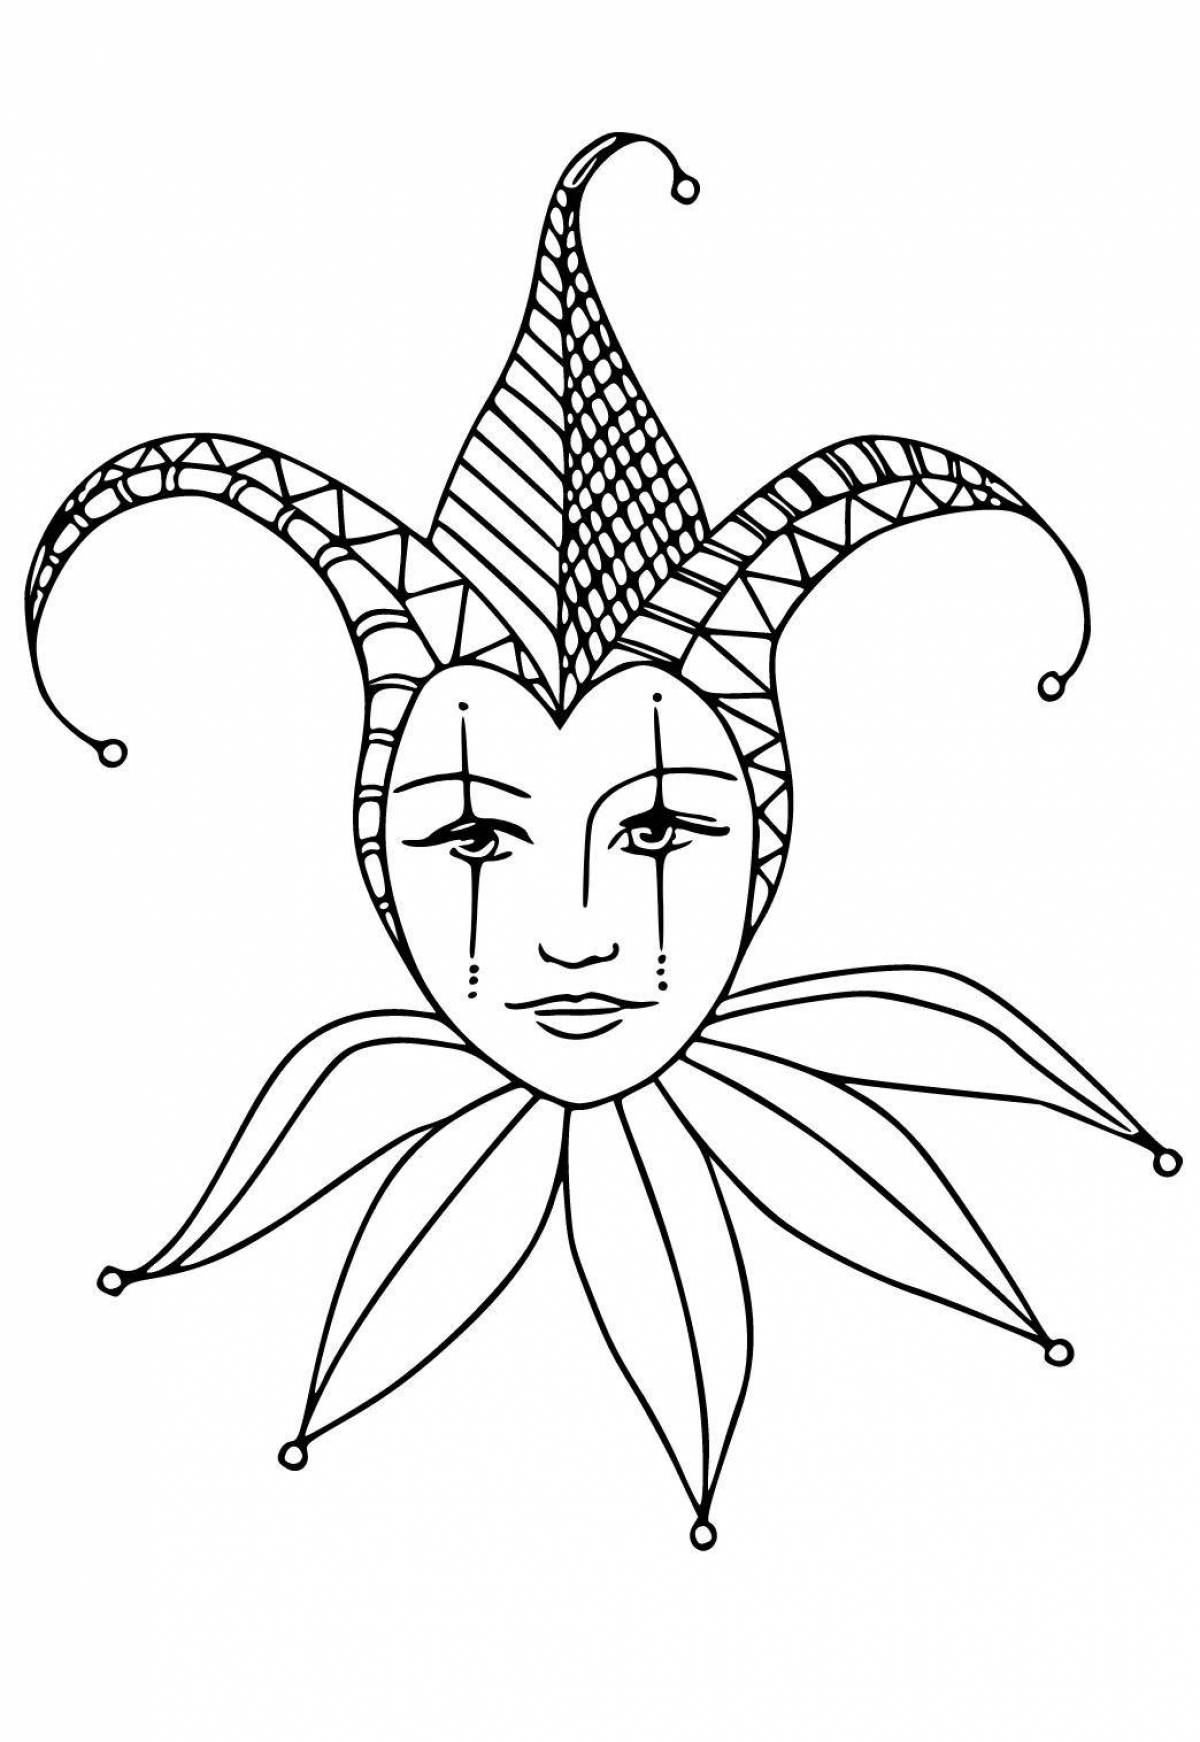 Charming harlequin coloring page